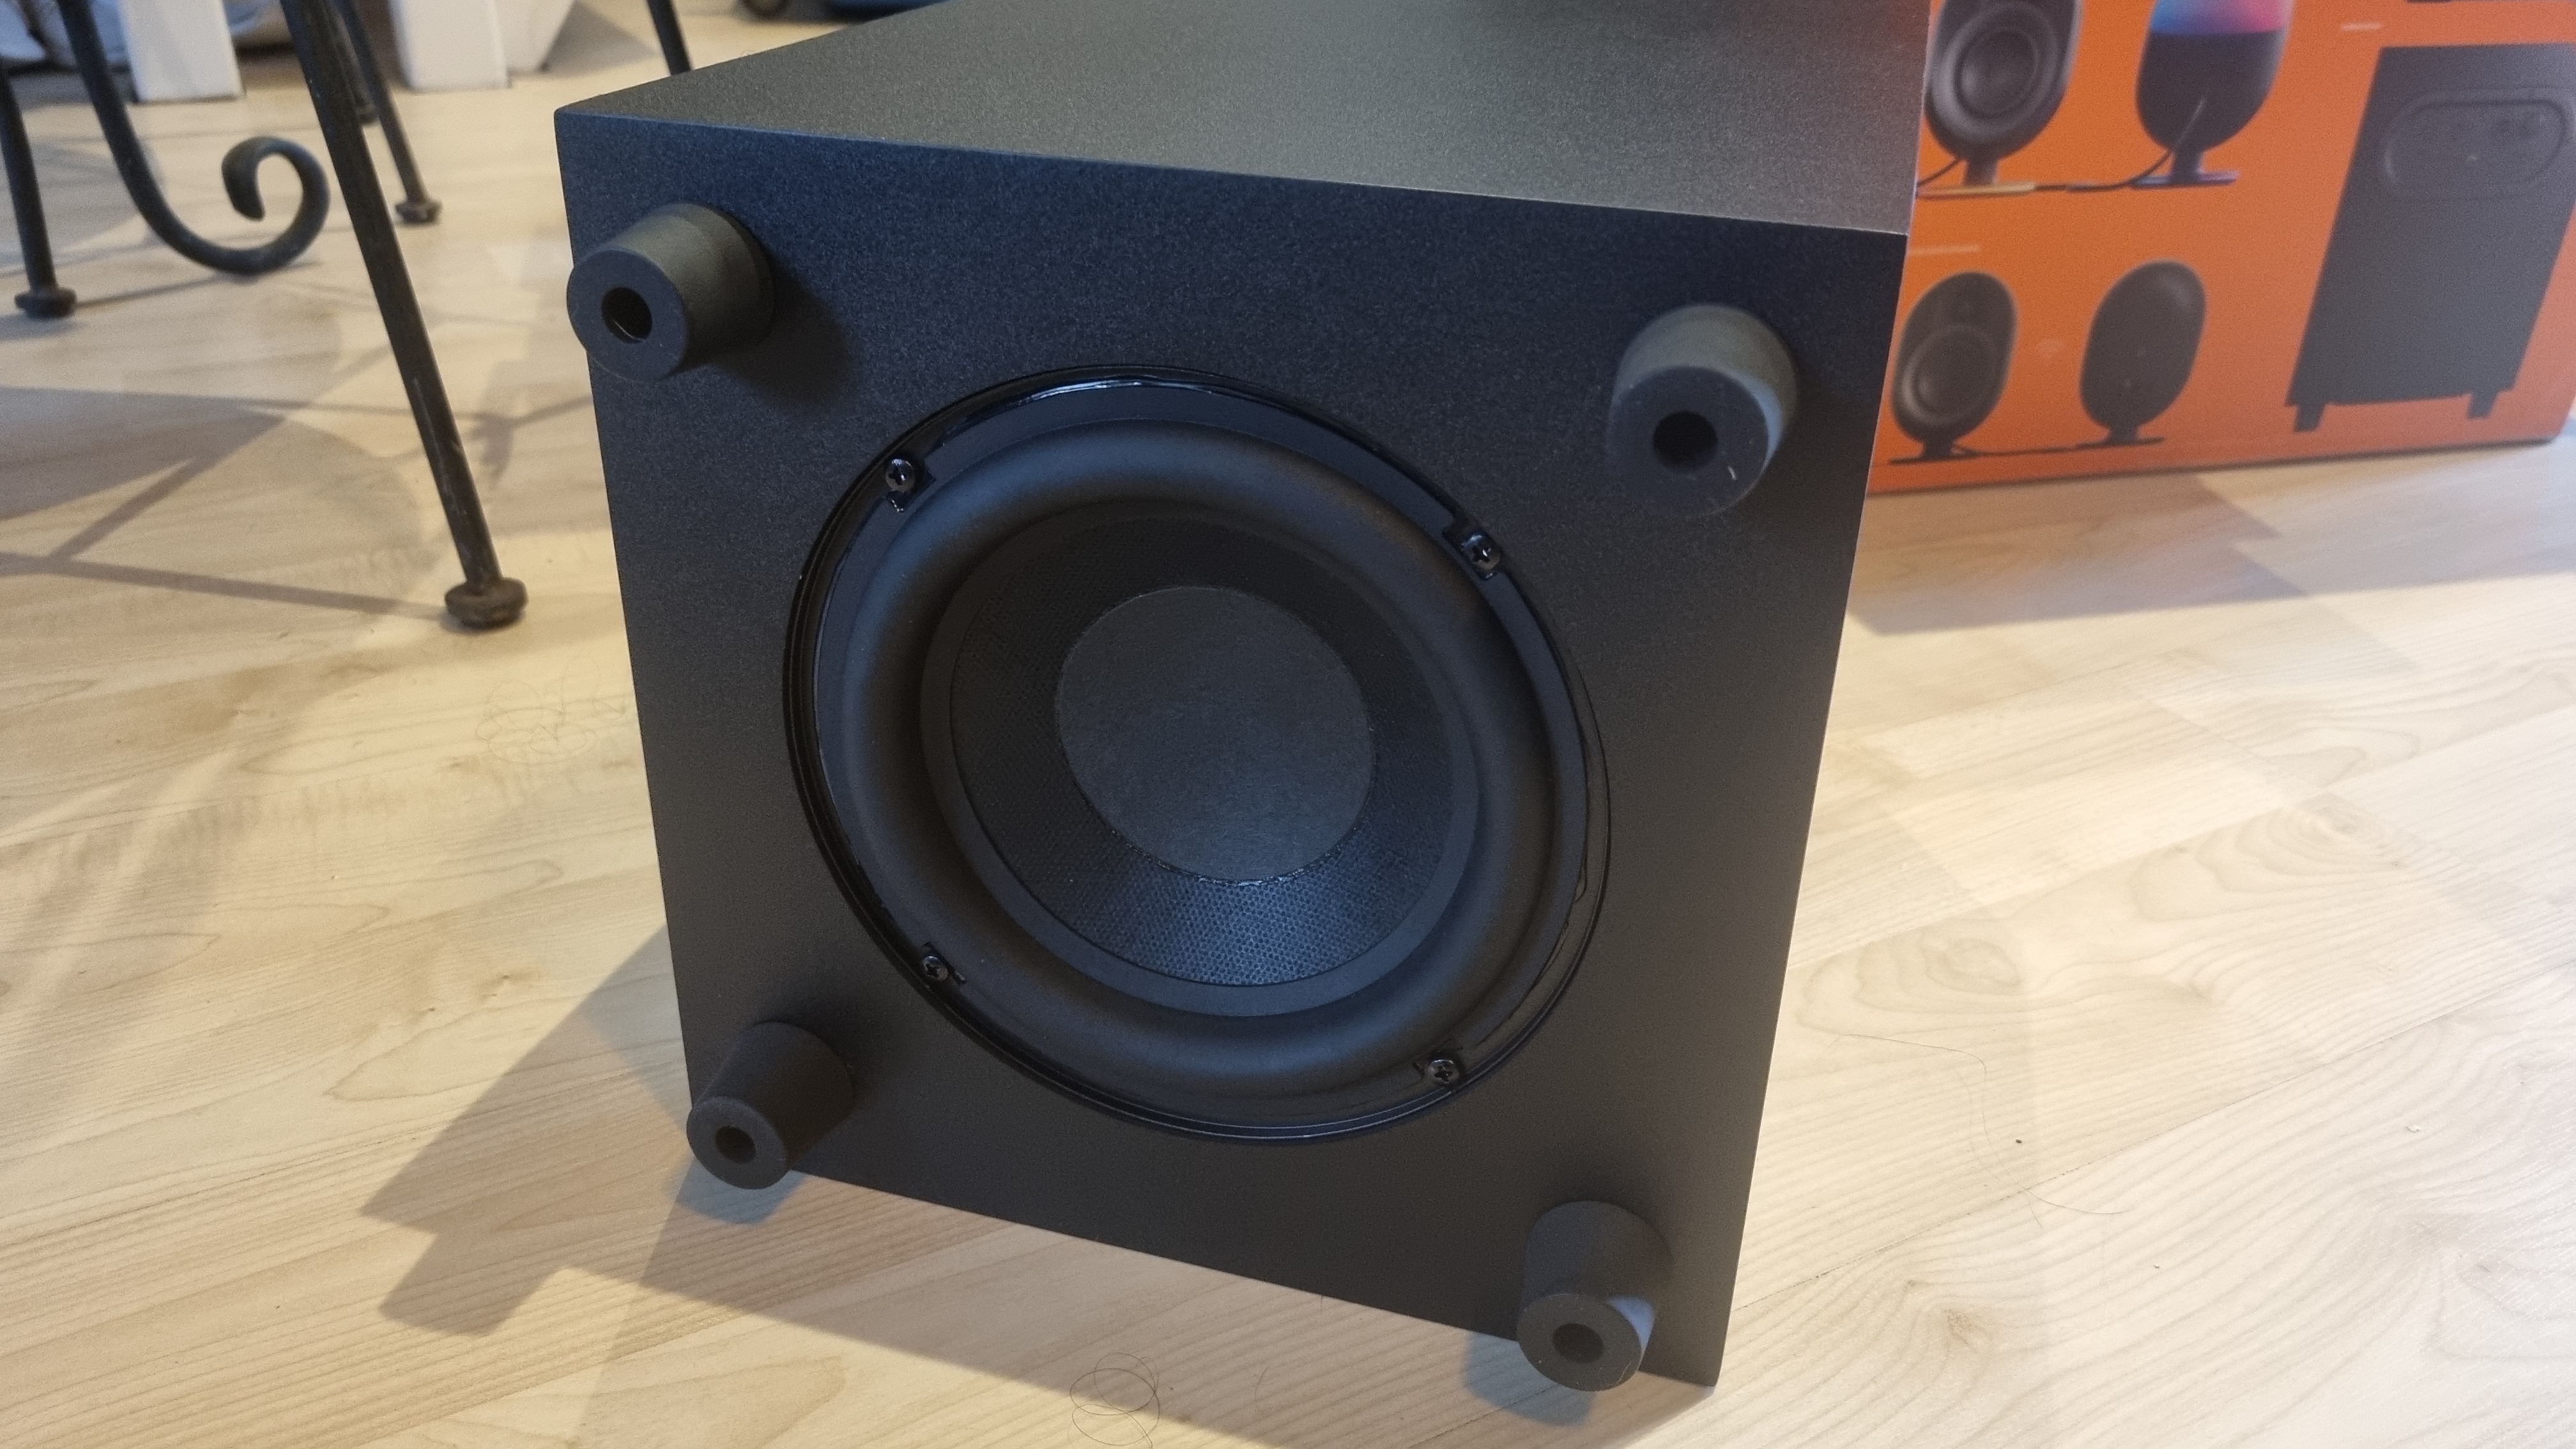 The underside of the subwoofer of the SteelSeries Arena 9 5.1 speakers, showing the large 6.5 inch driver